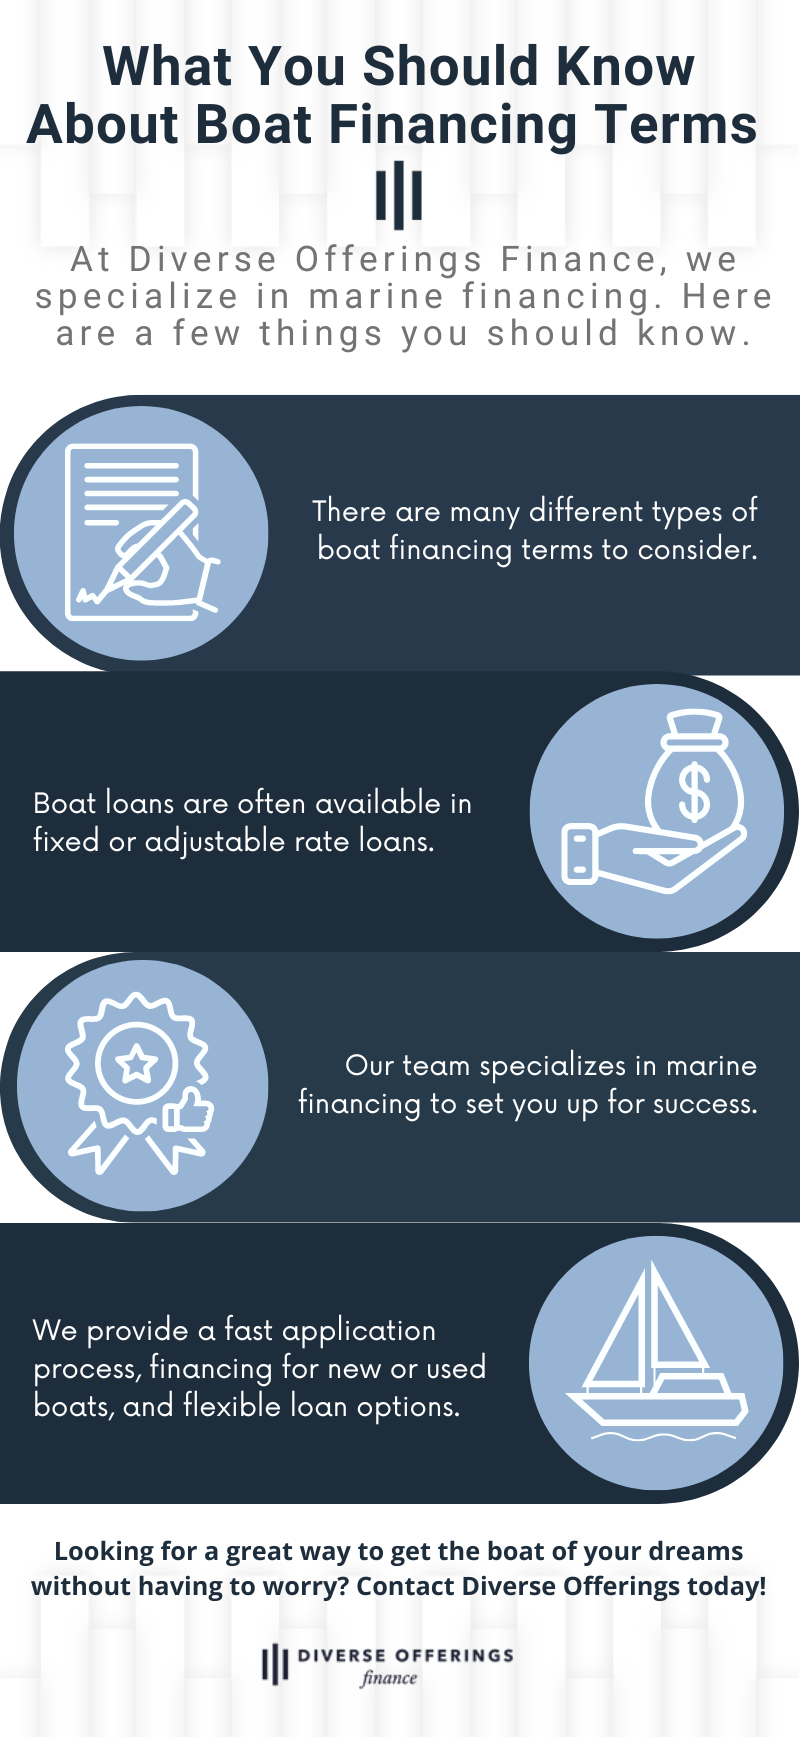 What You Should Know About Boat Financing Terms.png